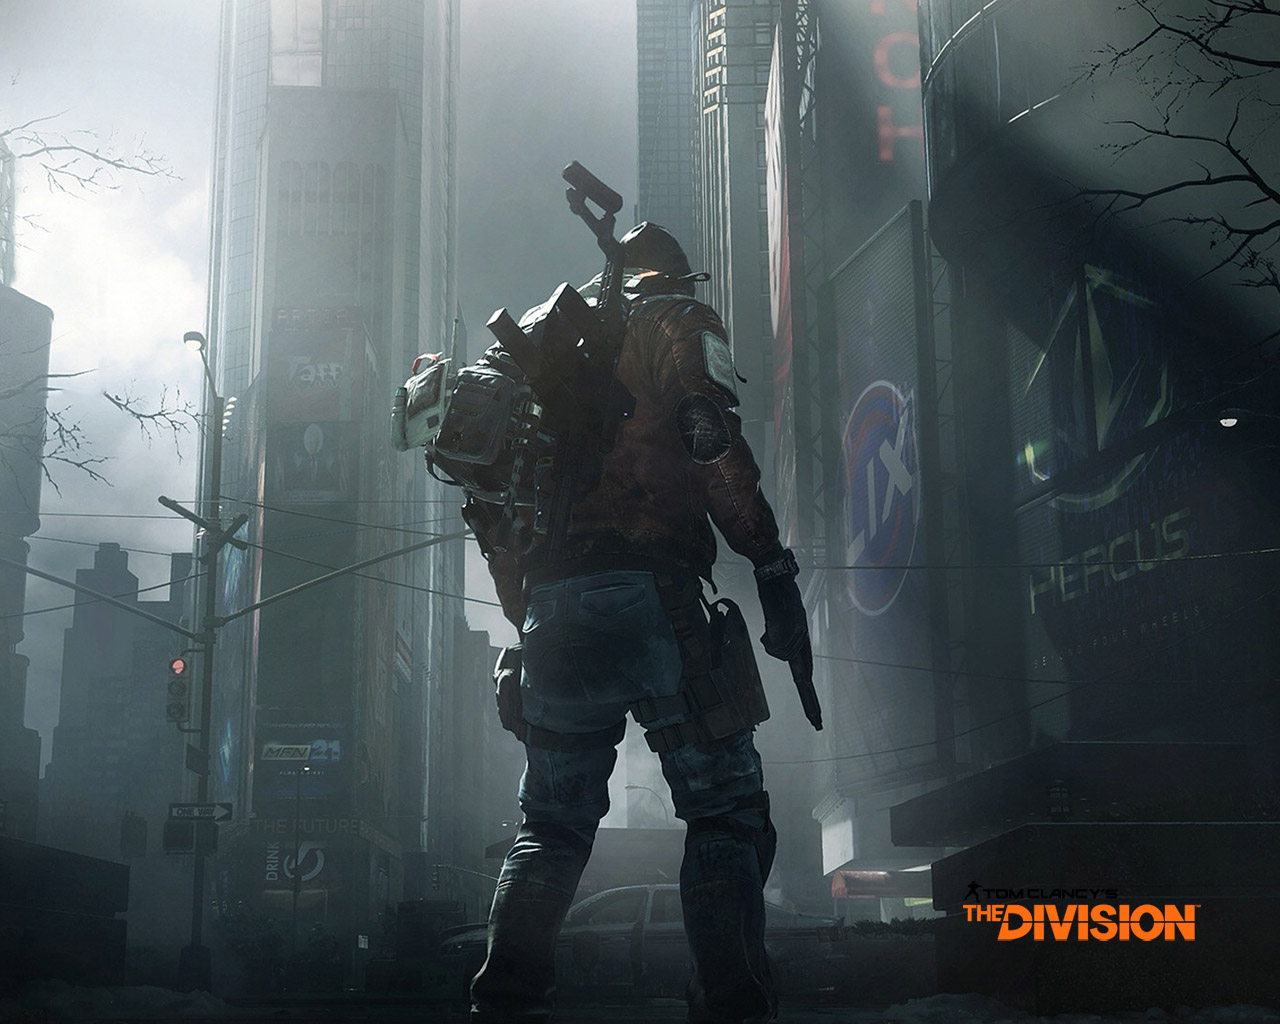 The Division 1280x1024 1280x1024